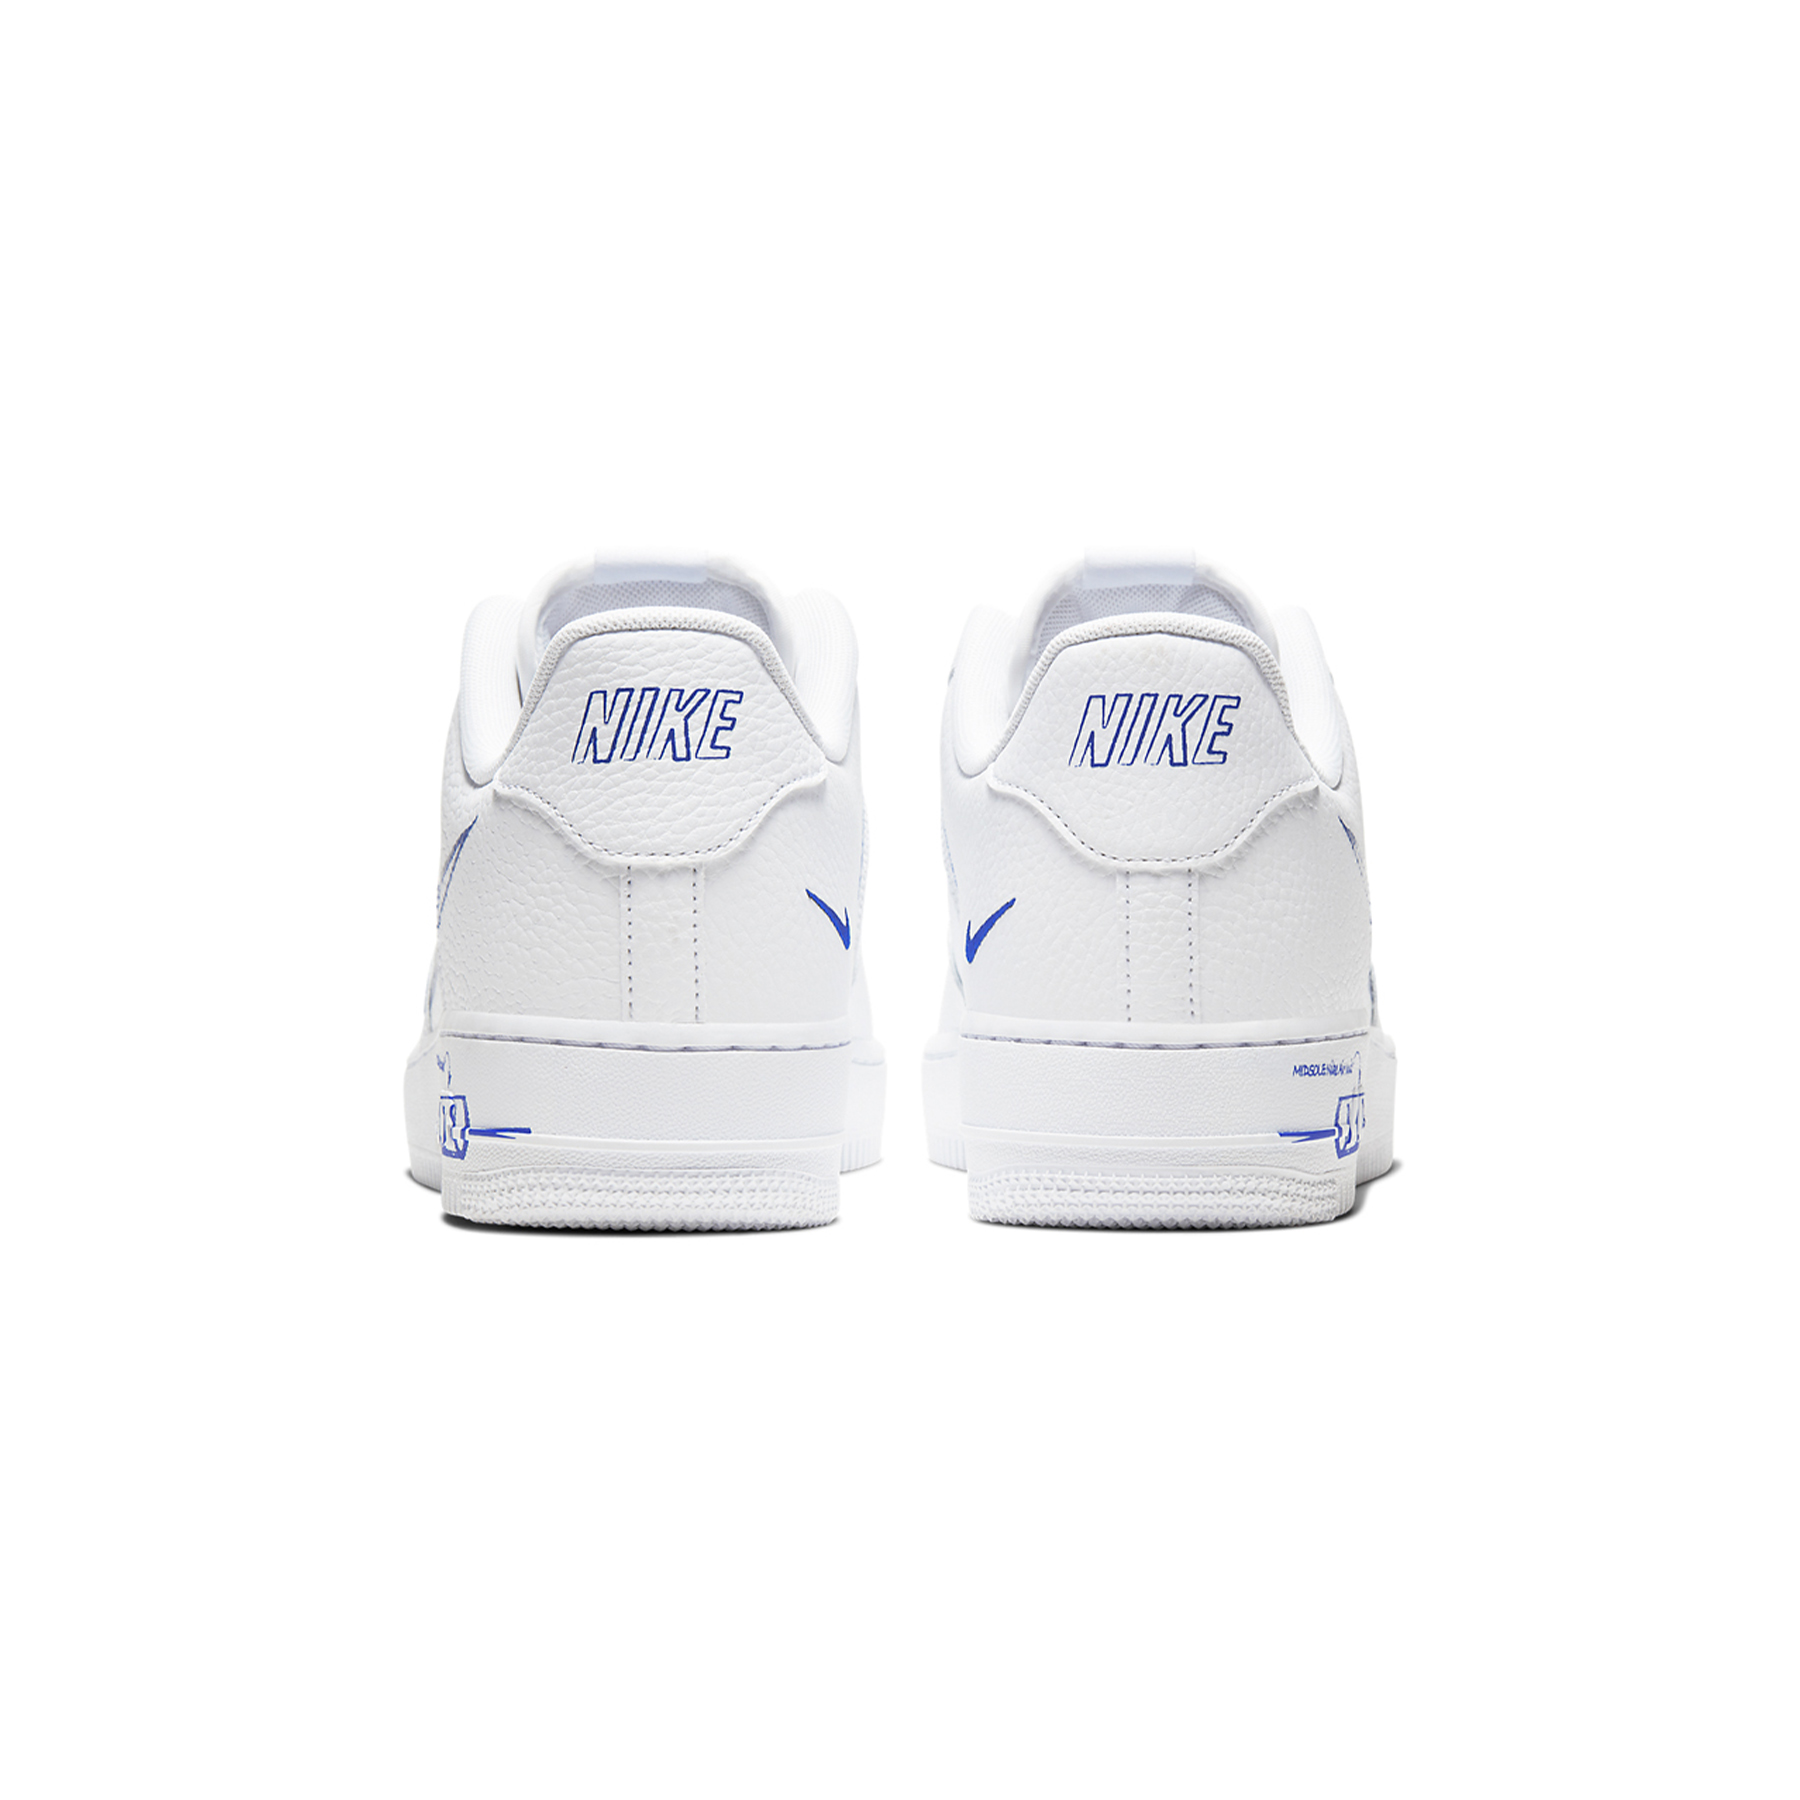 nike air force 1 low sketch white blue